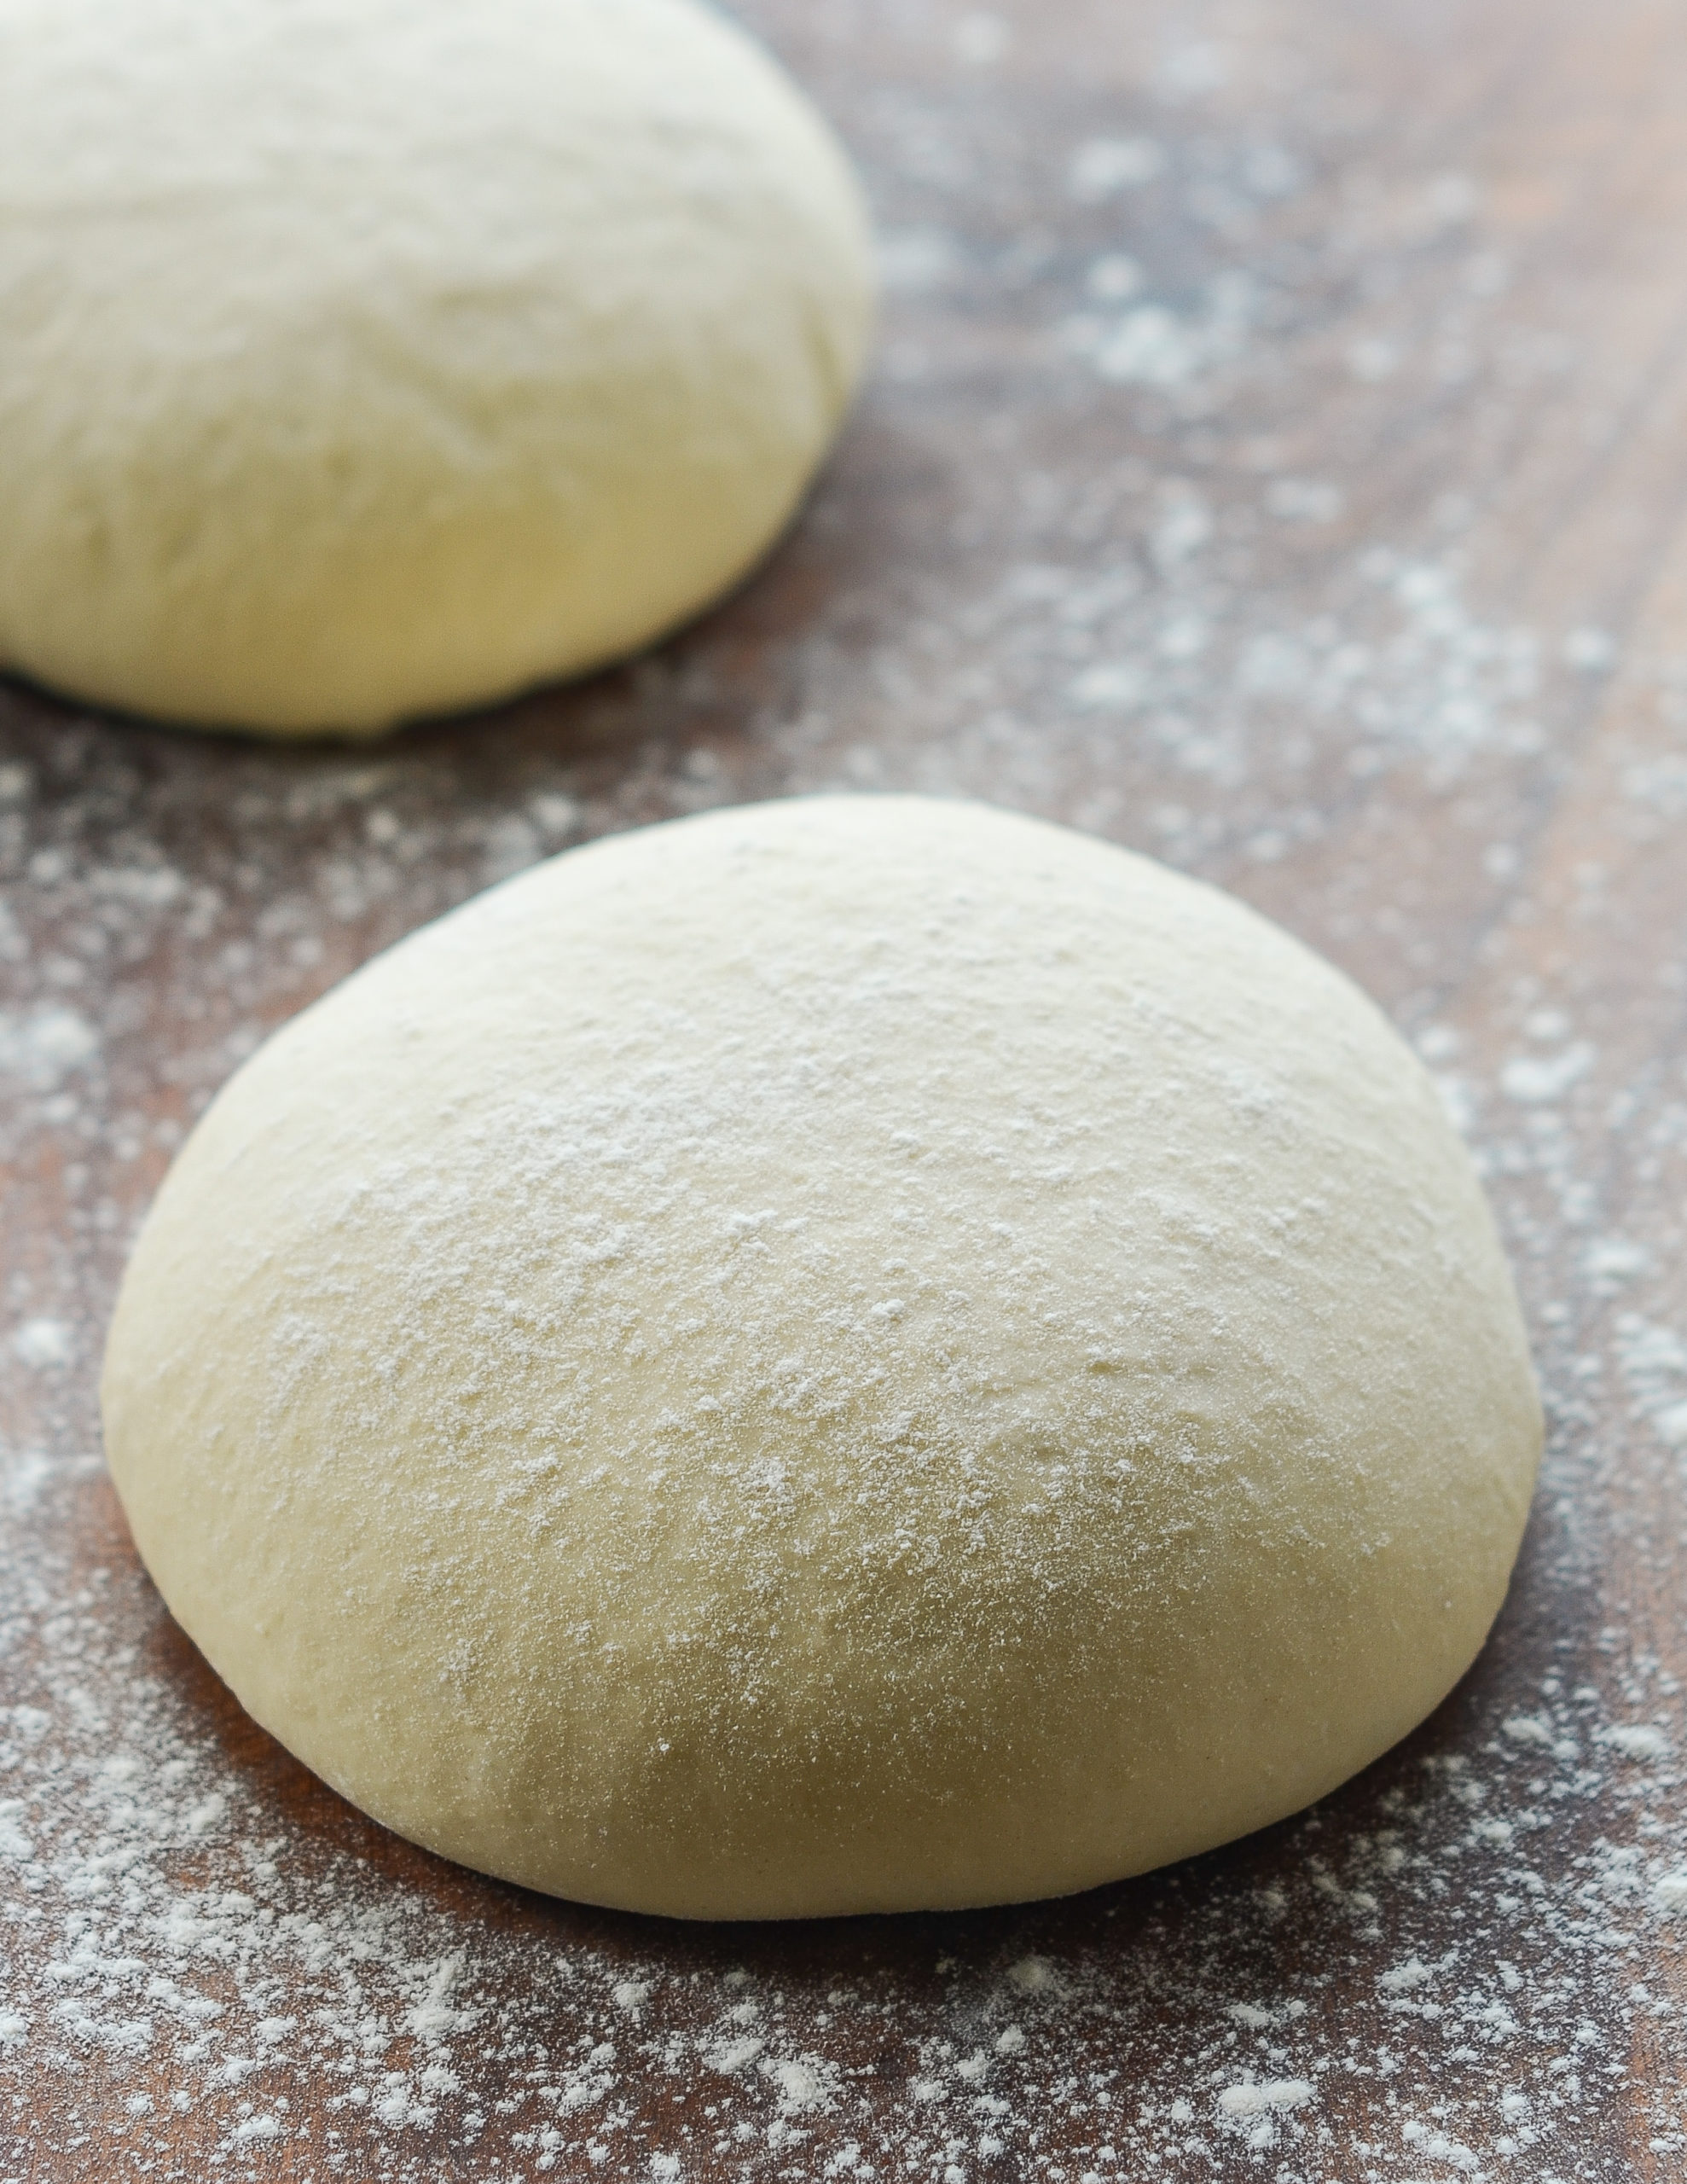 https://www.onceuponachef.com/images/2020/06/Pizza-Dough-scaled.jpg